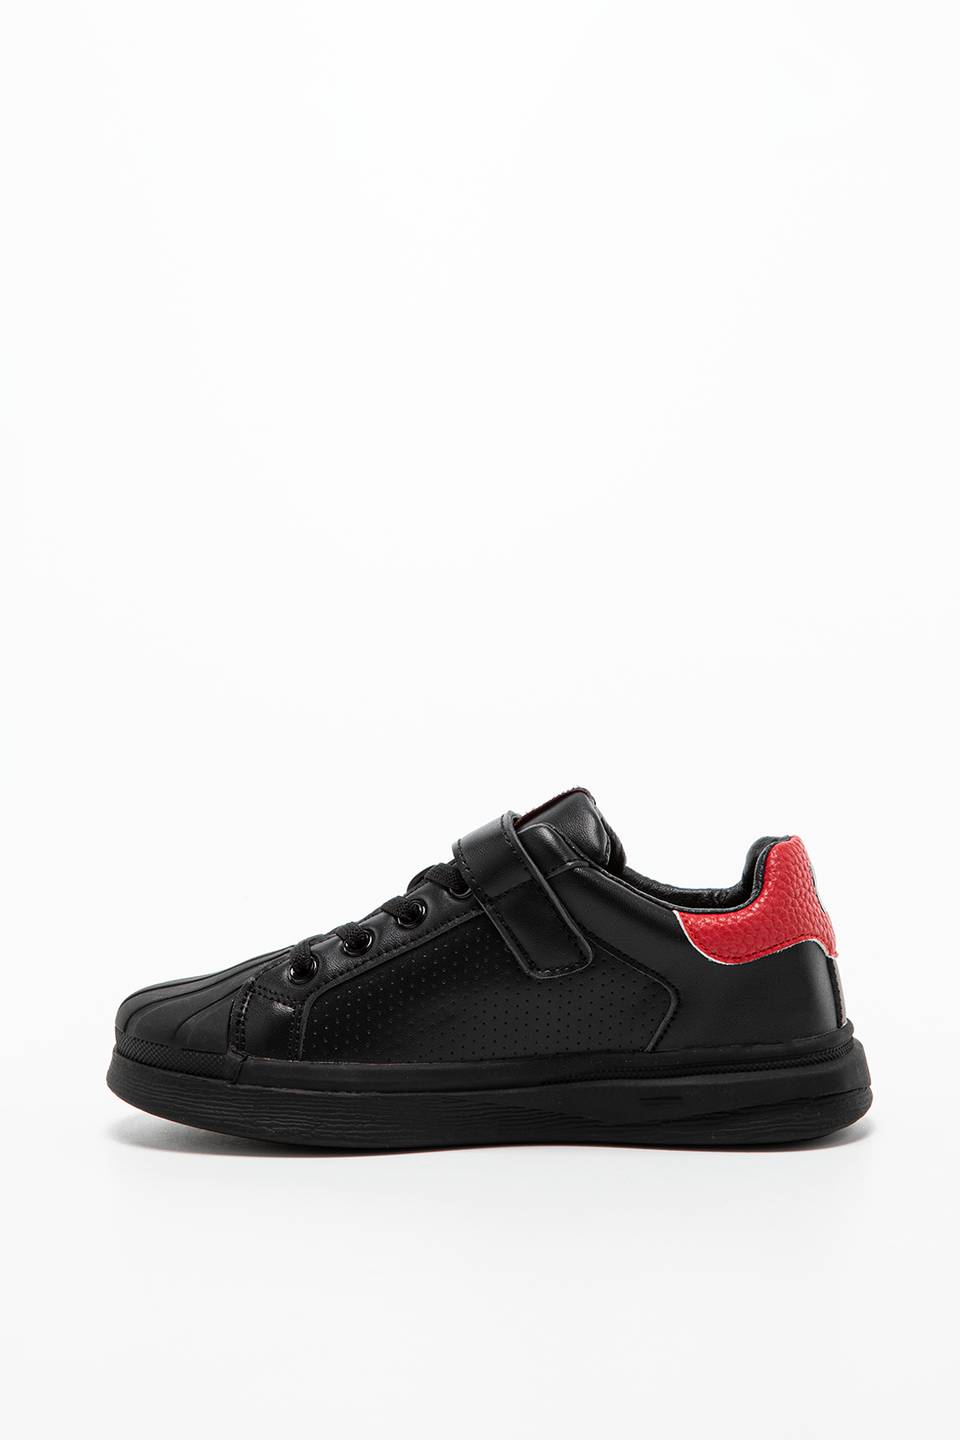 Sneakers Big Star GG374022-BLACK/RED